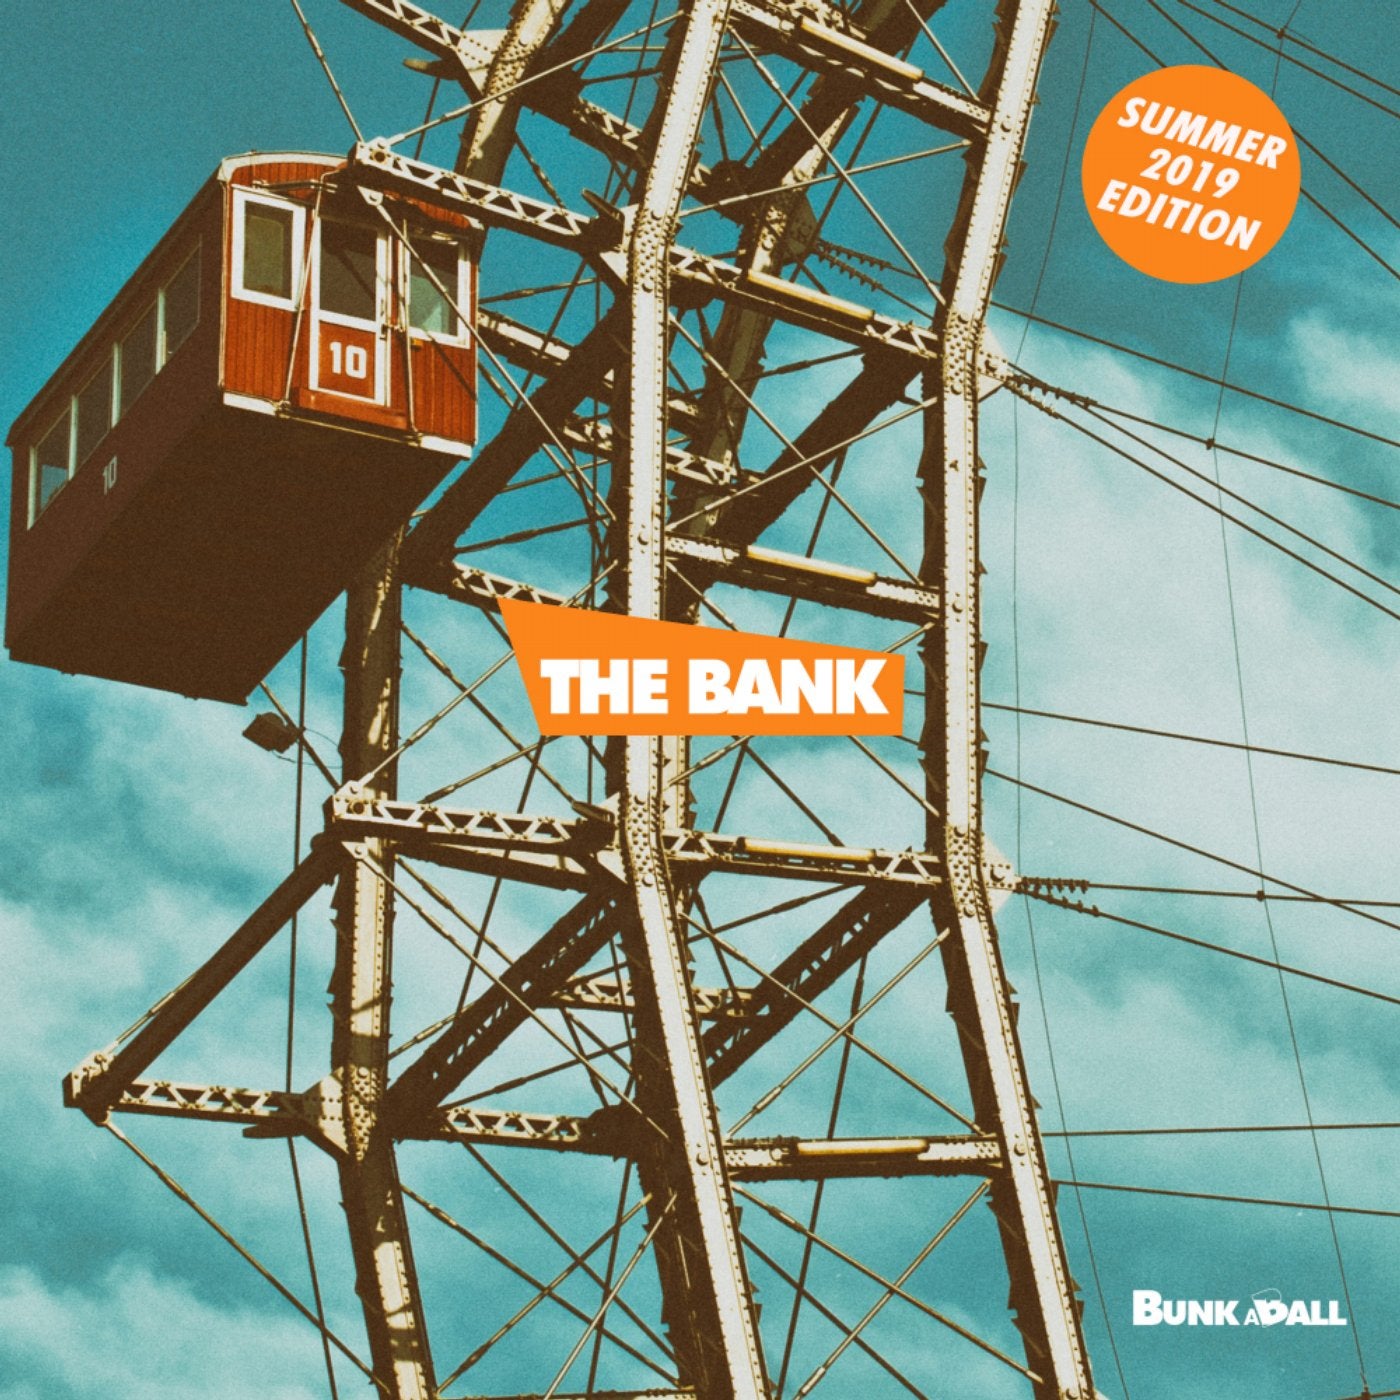 The Bank: Summer 2019 Edition